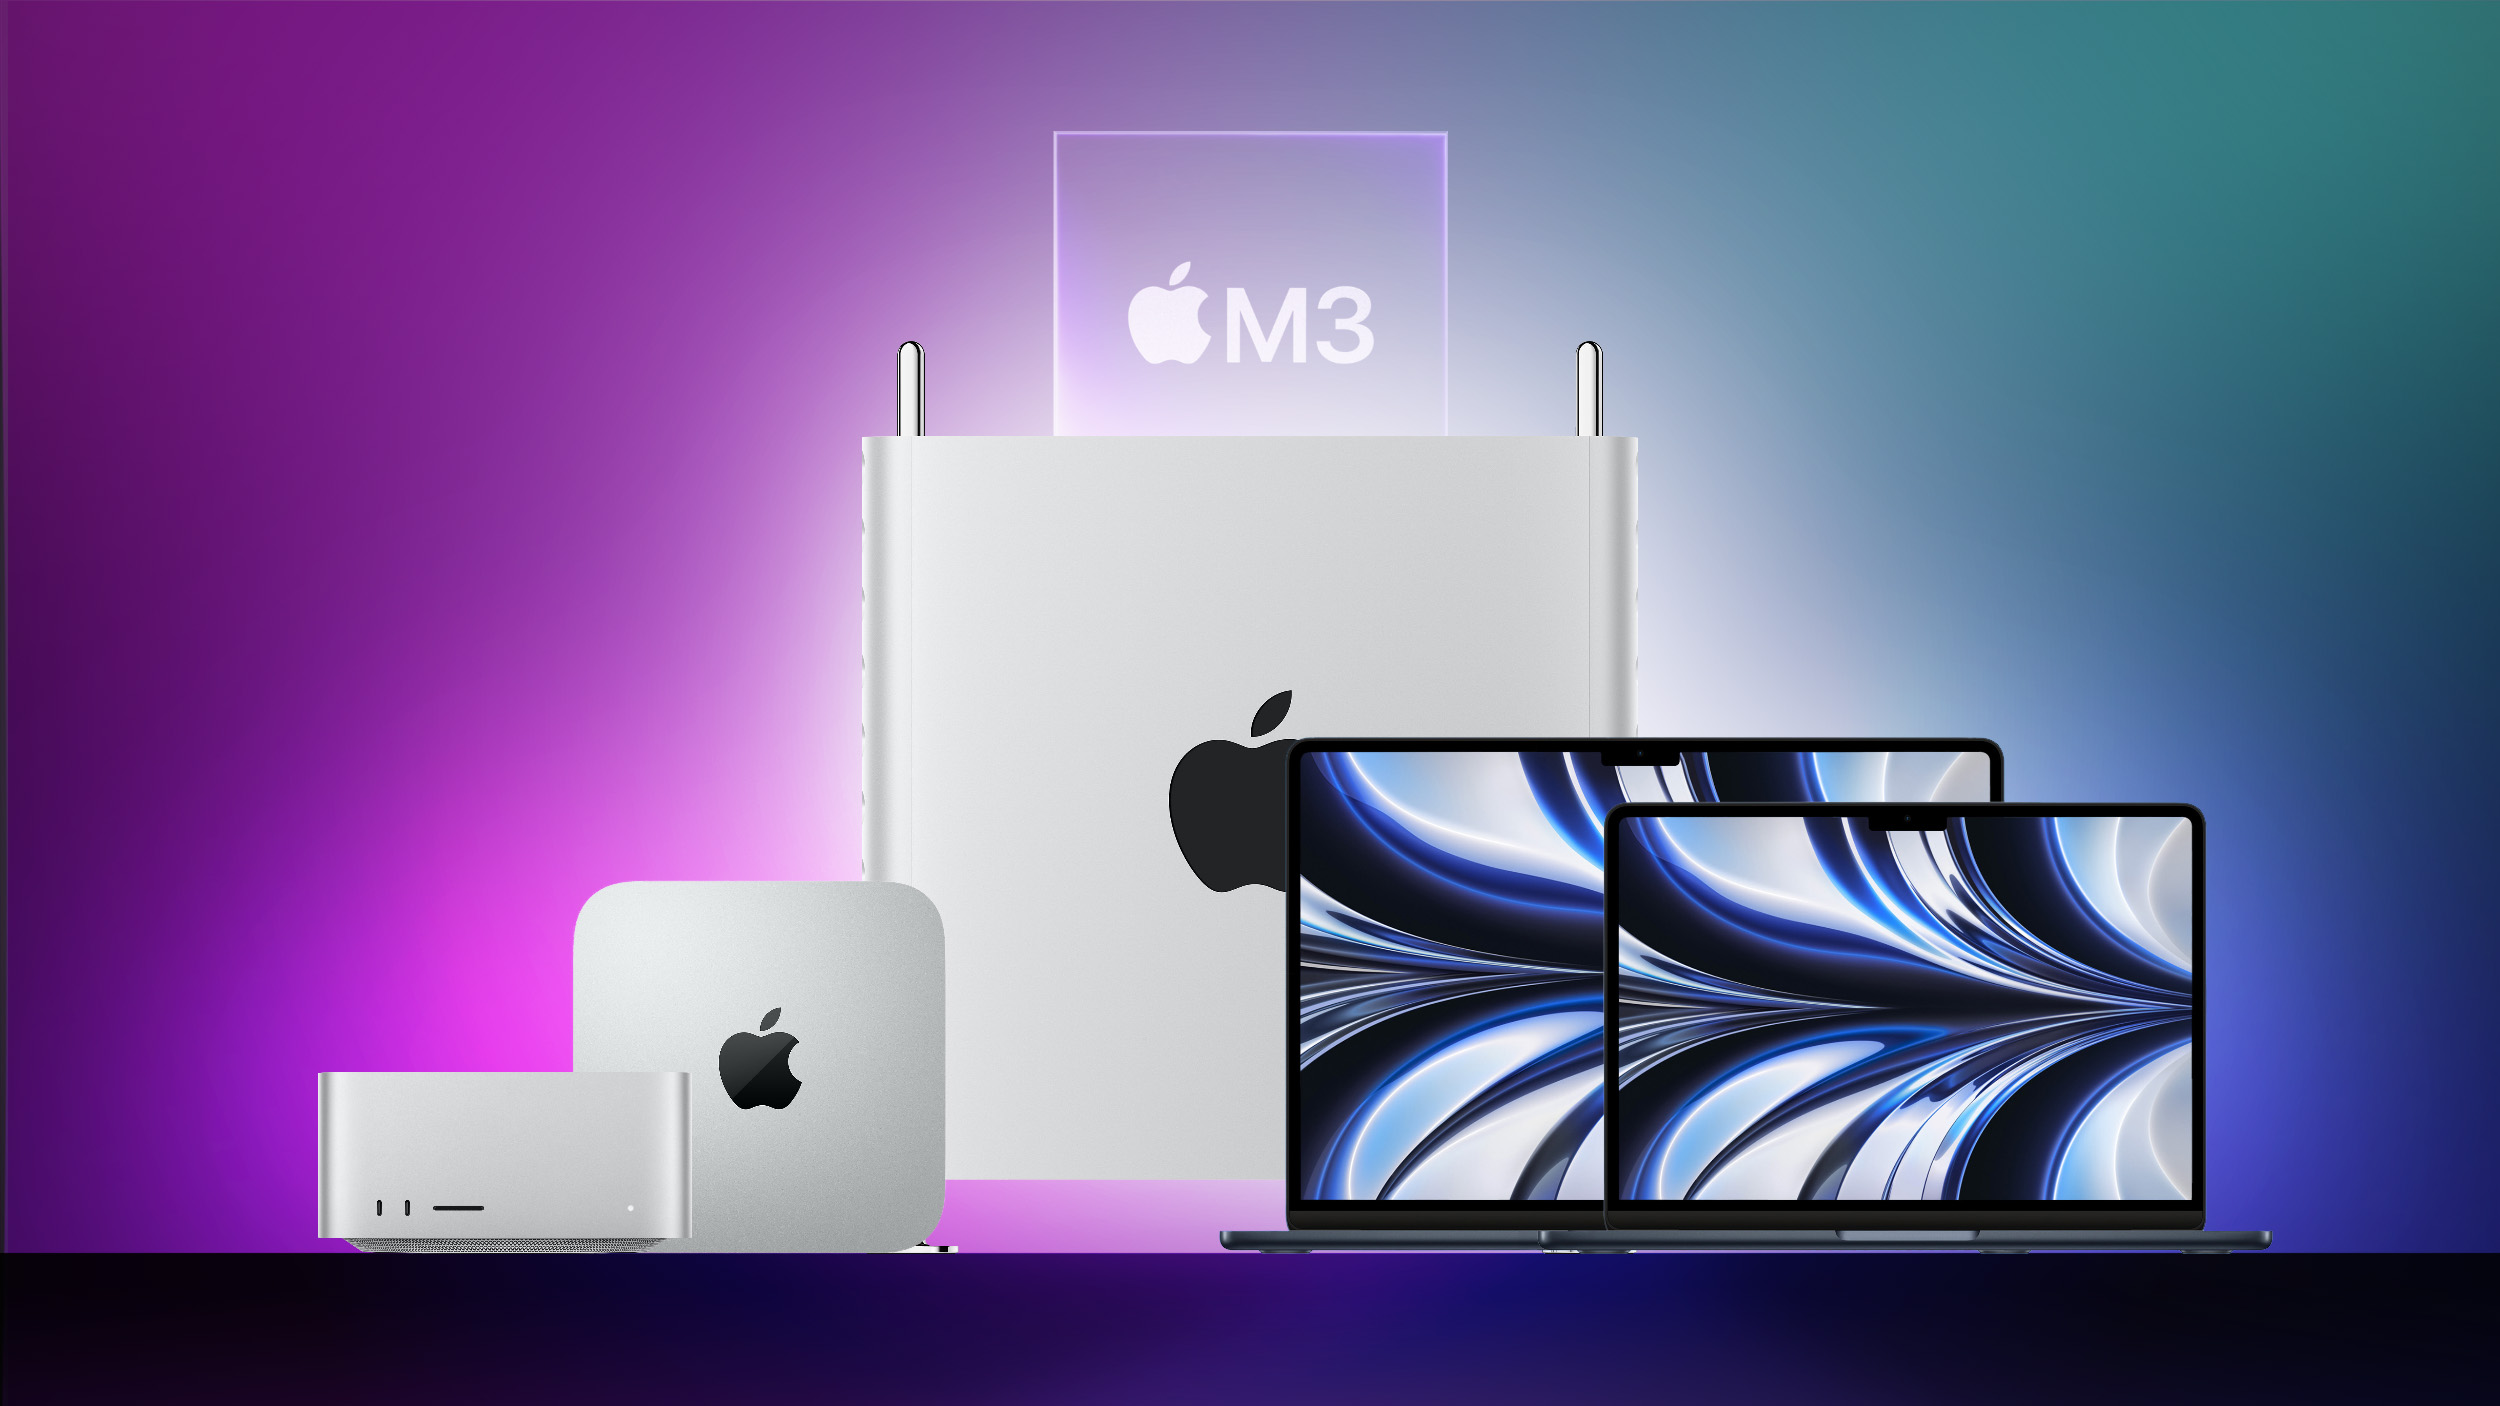 https://images.macrumors.com/article-new/2023/11/When-Will-Apple-Launch-More-M3-Macs-Feature-Sans-13inch-MBP.jpg